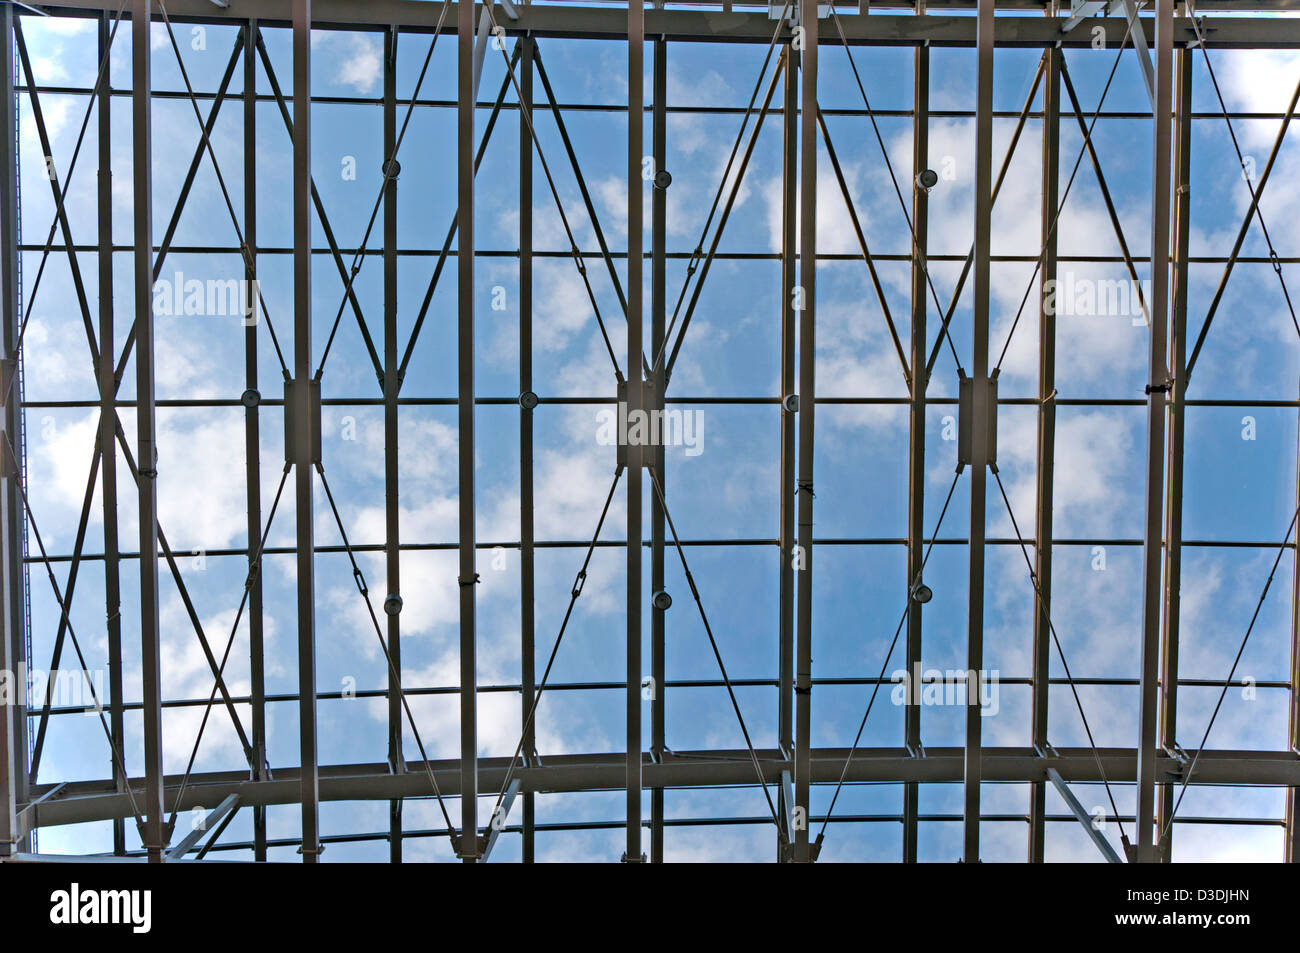 Blue sky with white clouds viewed by a metal ceiling construction Stock Photo